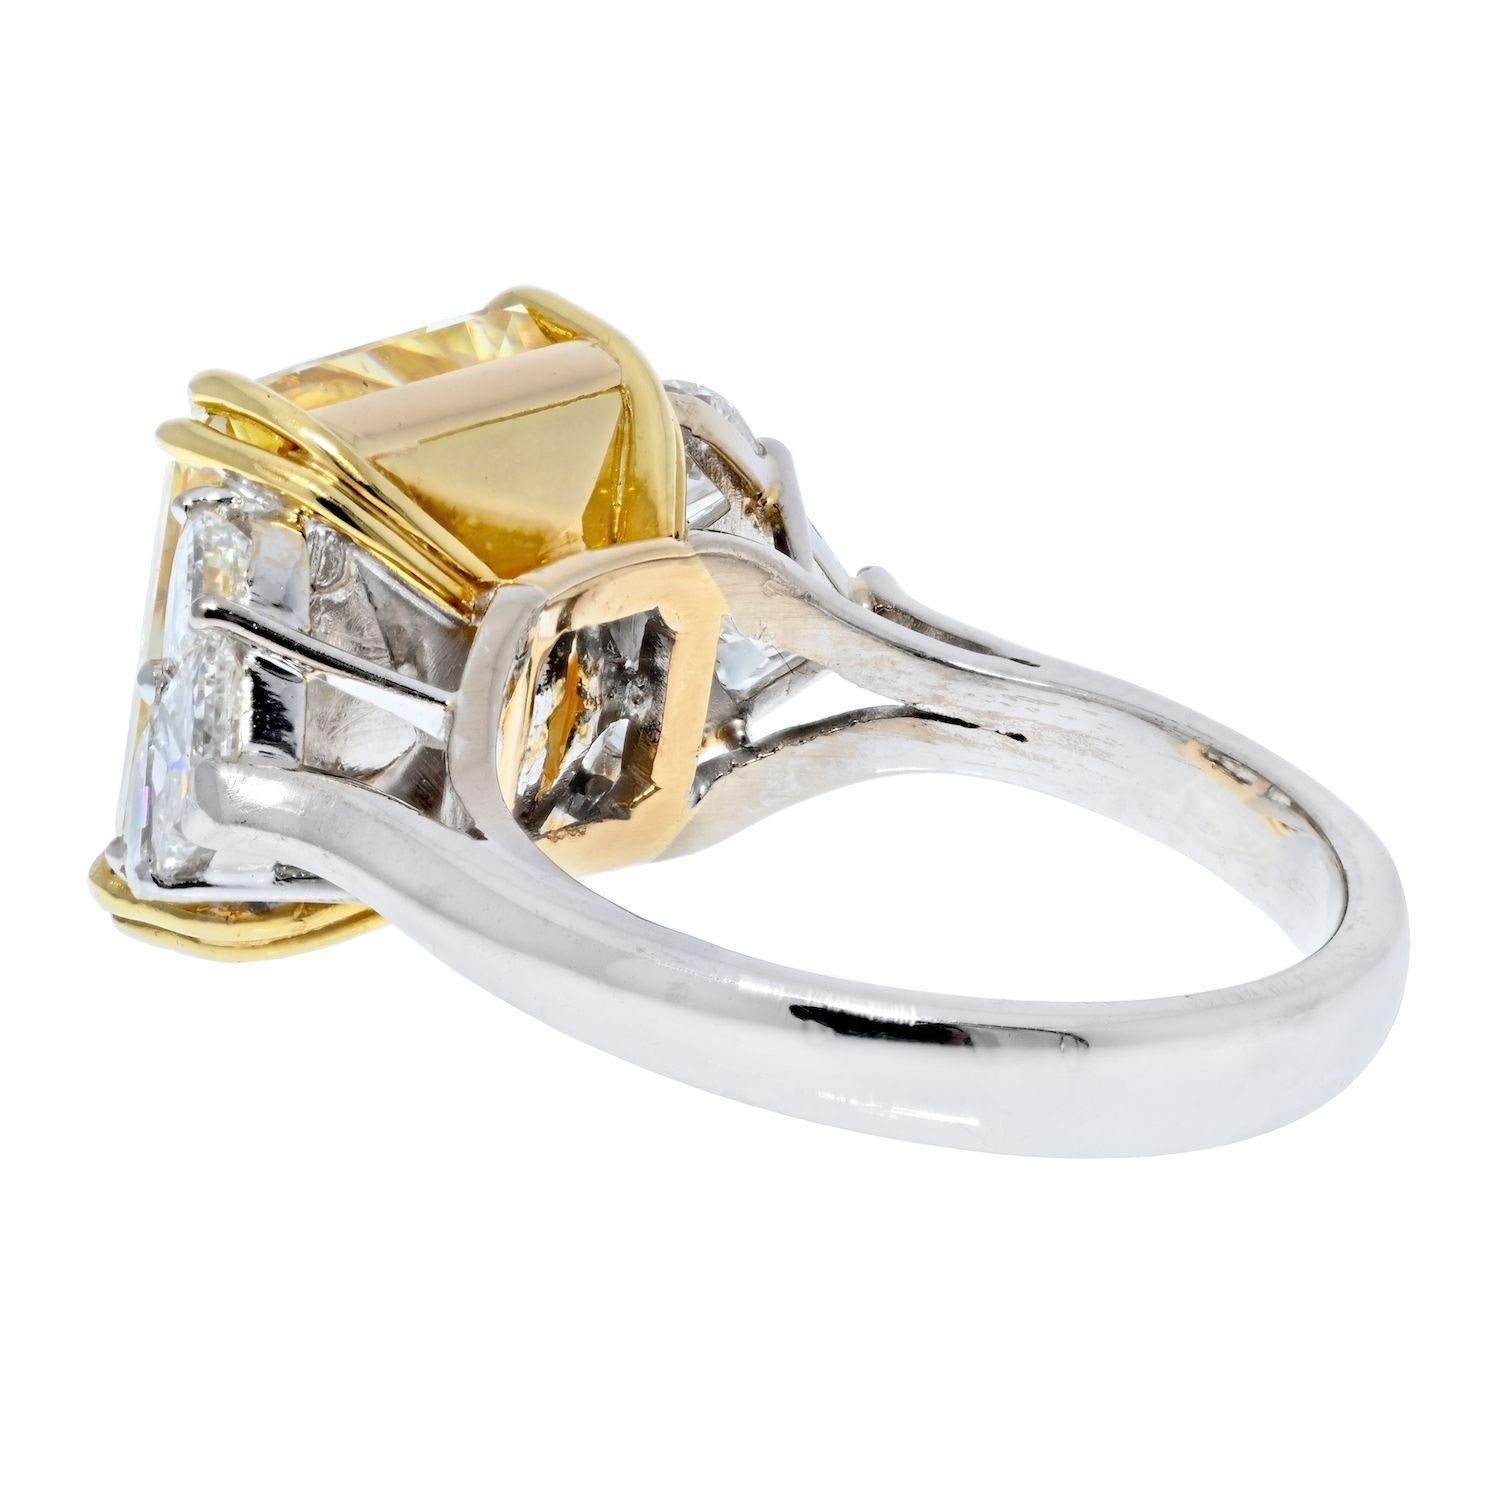 This is a stunning 12.96 carat natural fancy yellow radiant cut diamond that is just four points shy of 13 carats. Grand look on your finger that this center diamond delivers will knock your socks off! Also with a touch of shimmering white diamonds